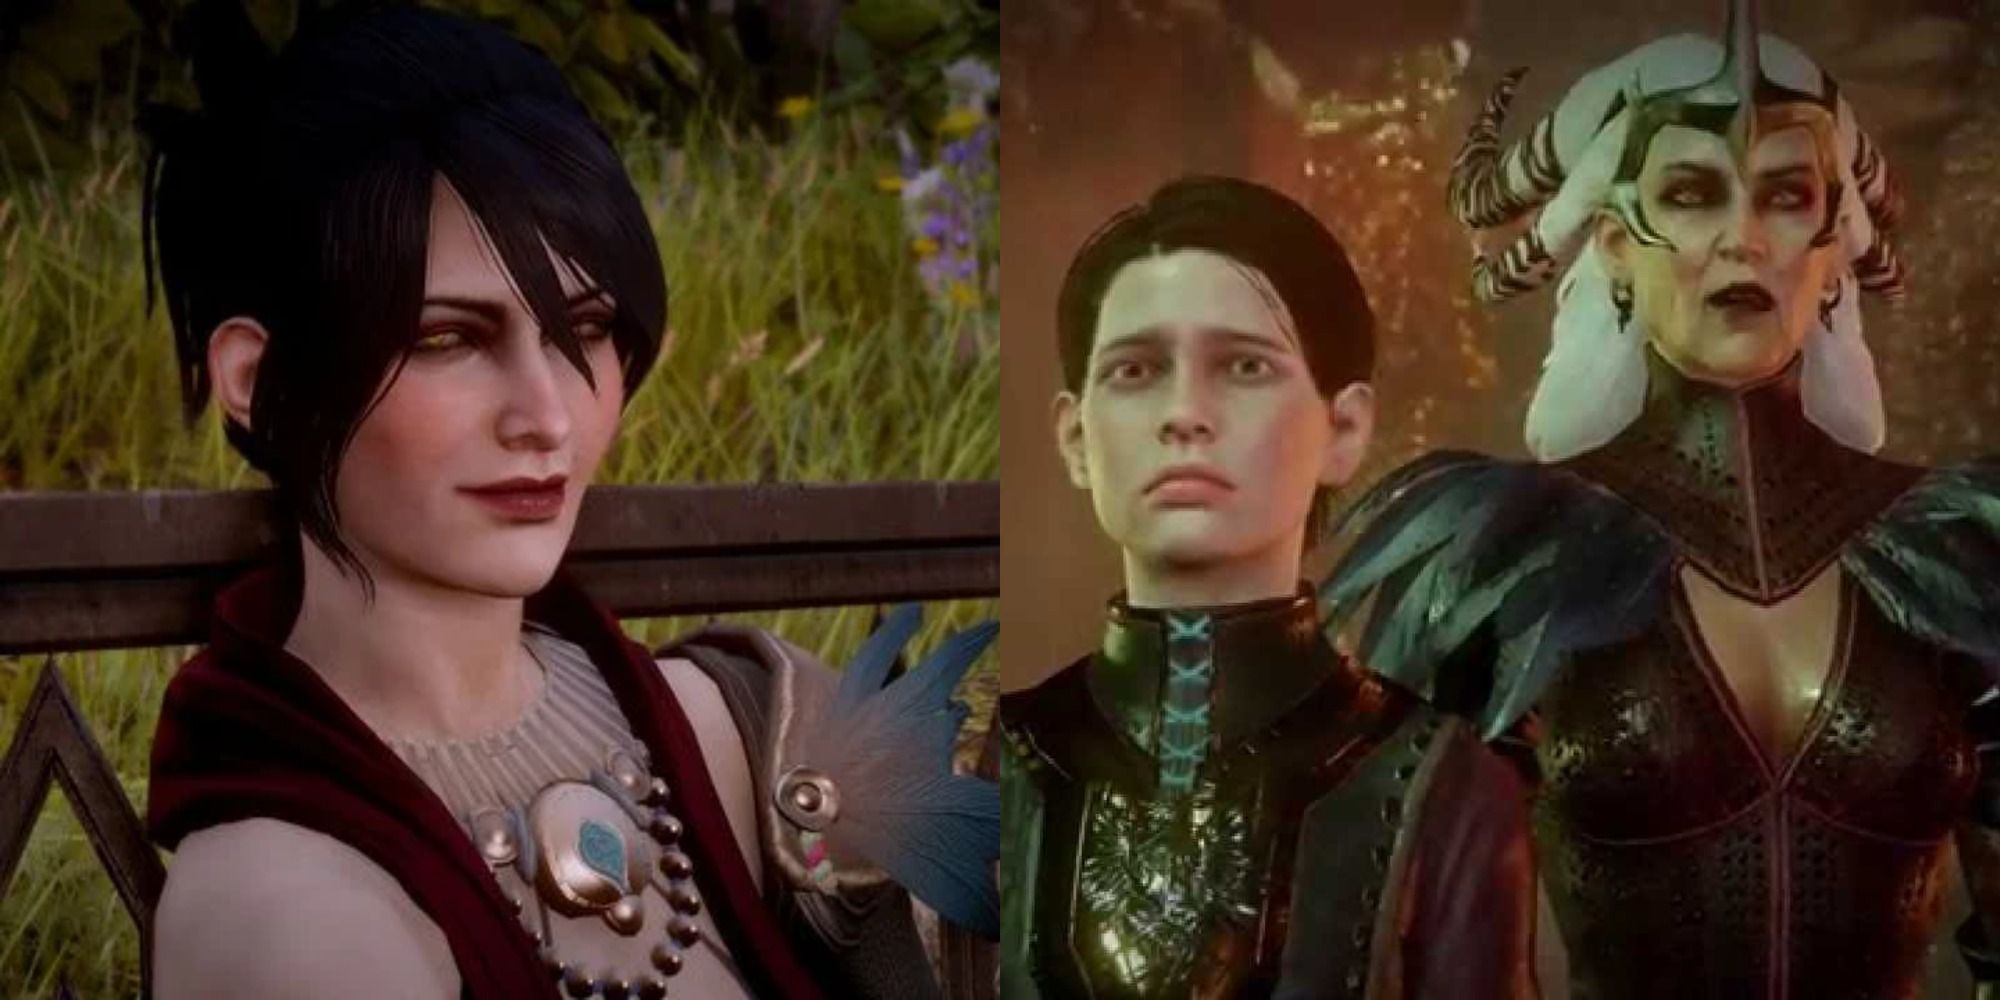 angela clinger recommends morrigan dragon age sexy pic